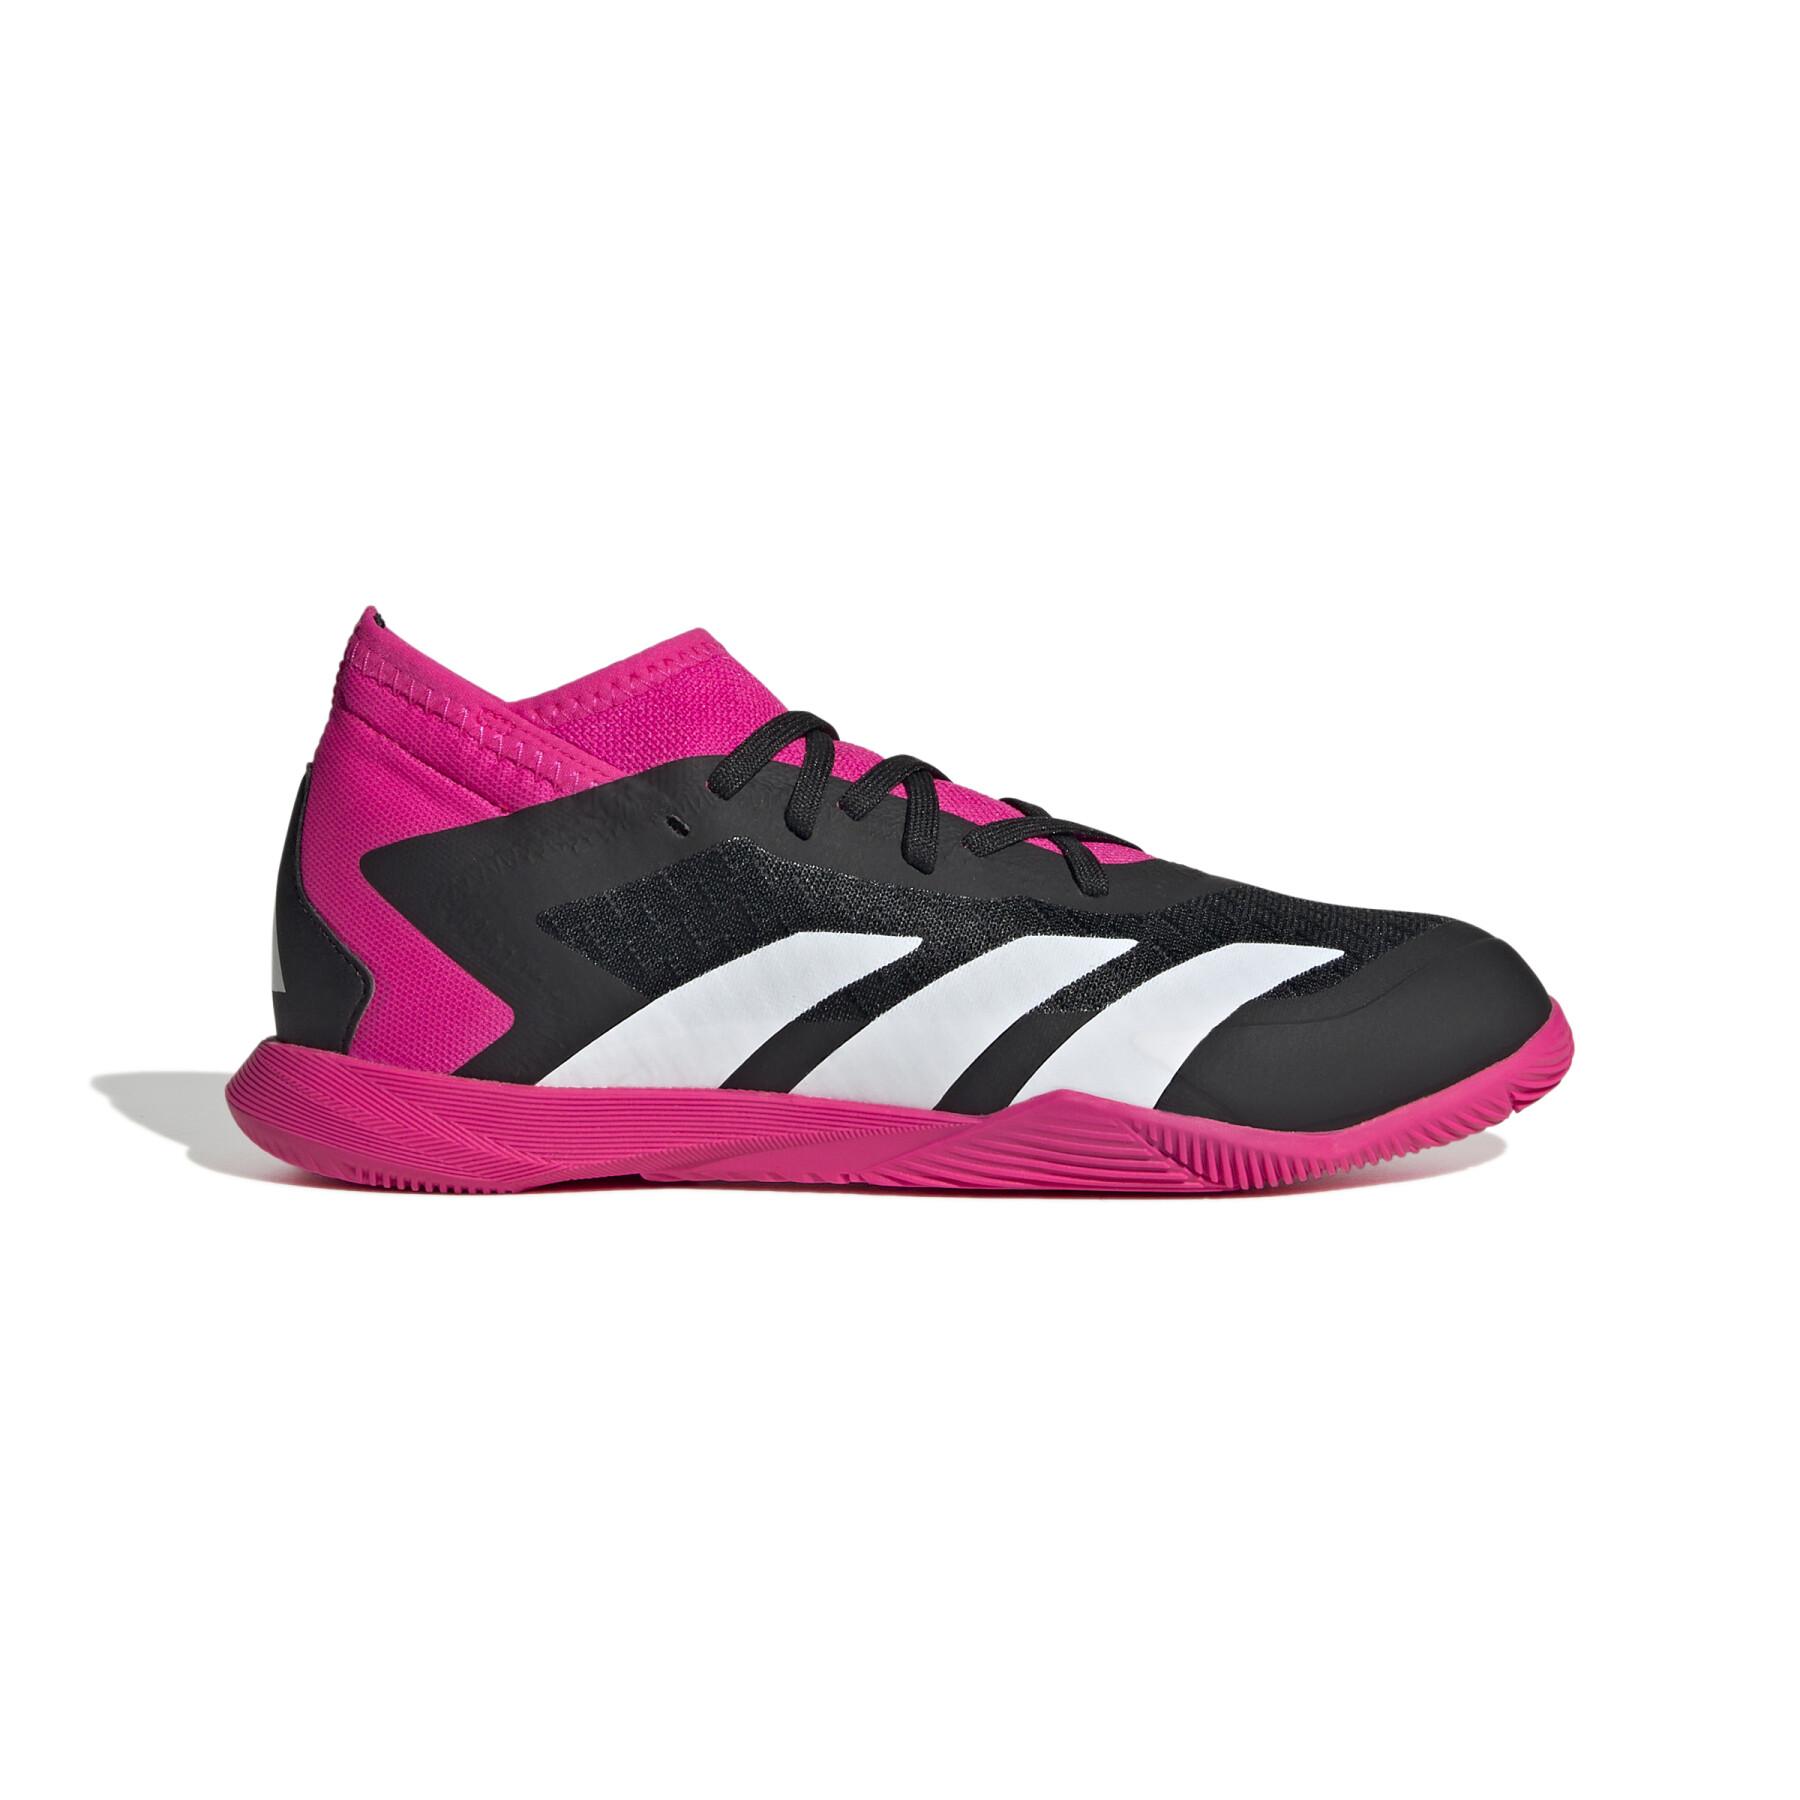 Children's indoor soccer shoes adidas Predator Accuracy.3 - Own your Football